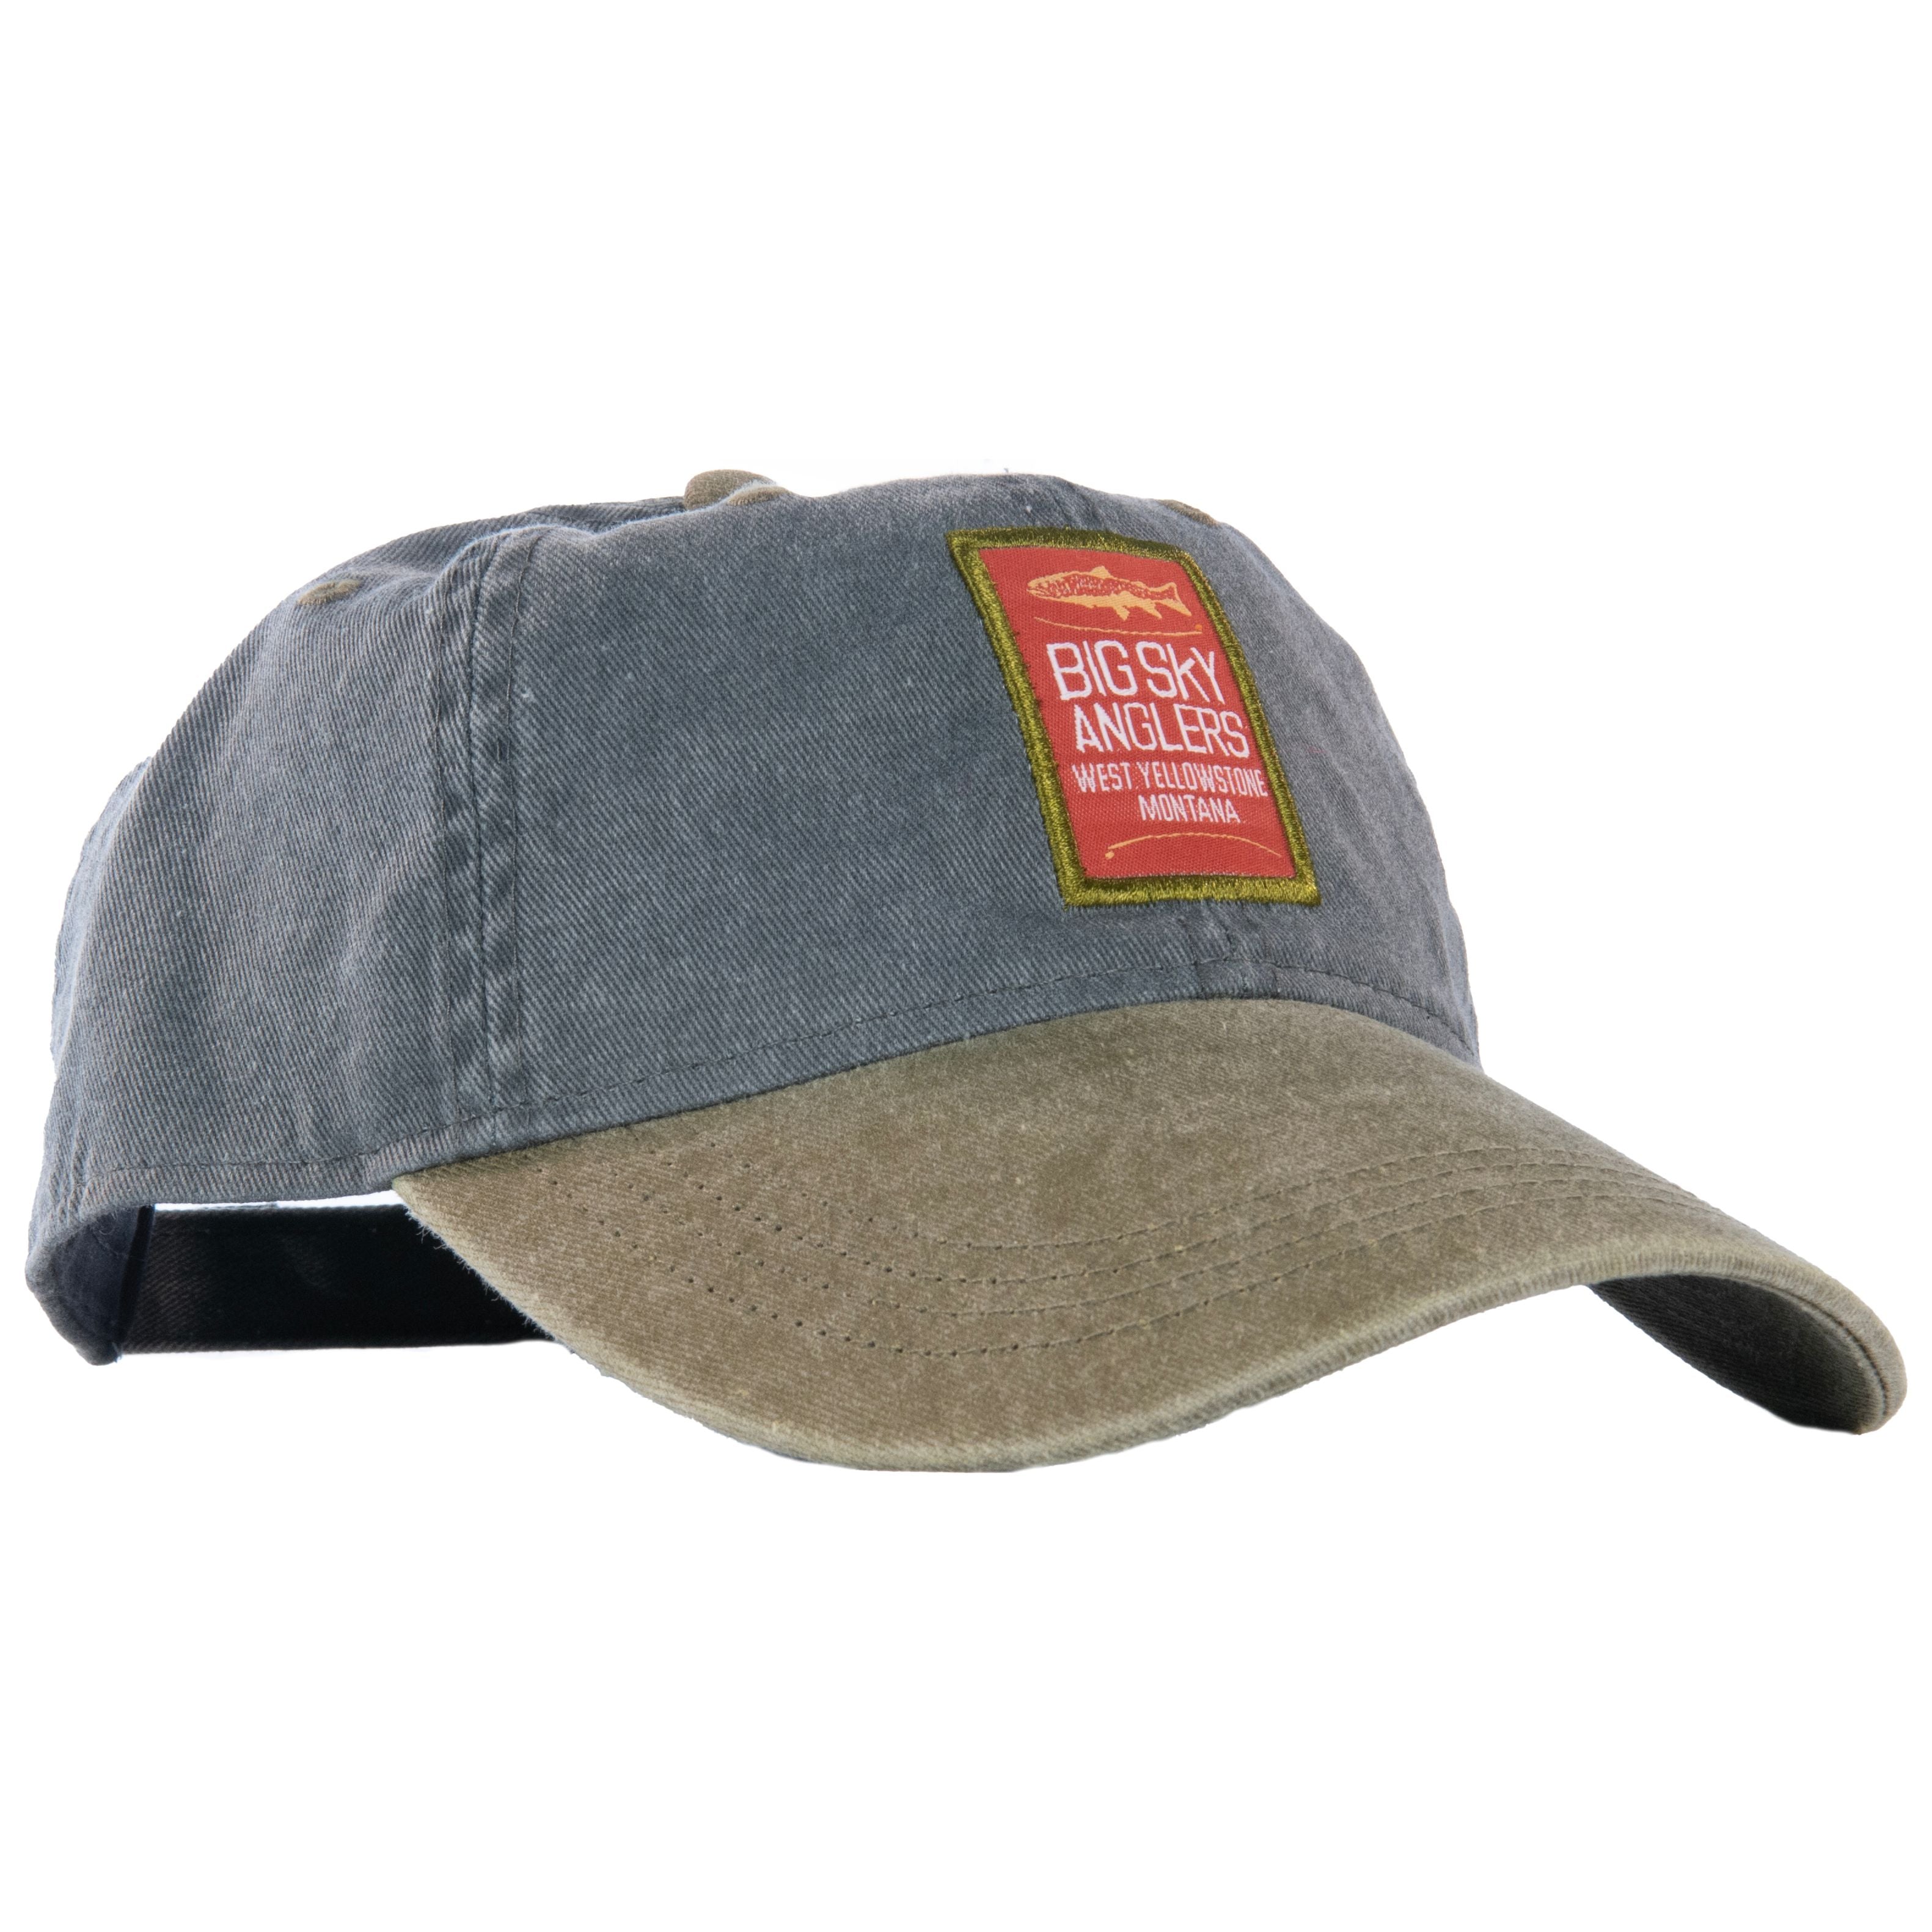 Big Sky Anglers Woven Classic Logo Canyon Cap - Spruce/Bark Default Title Image 01